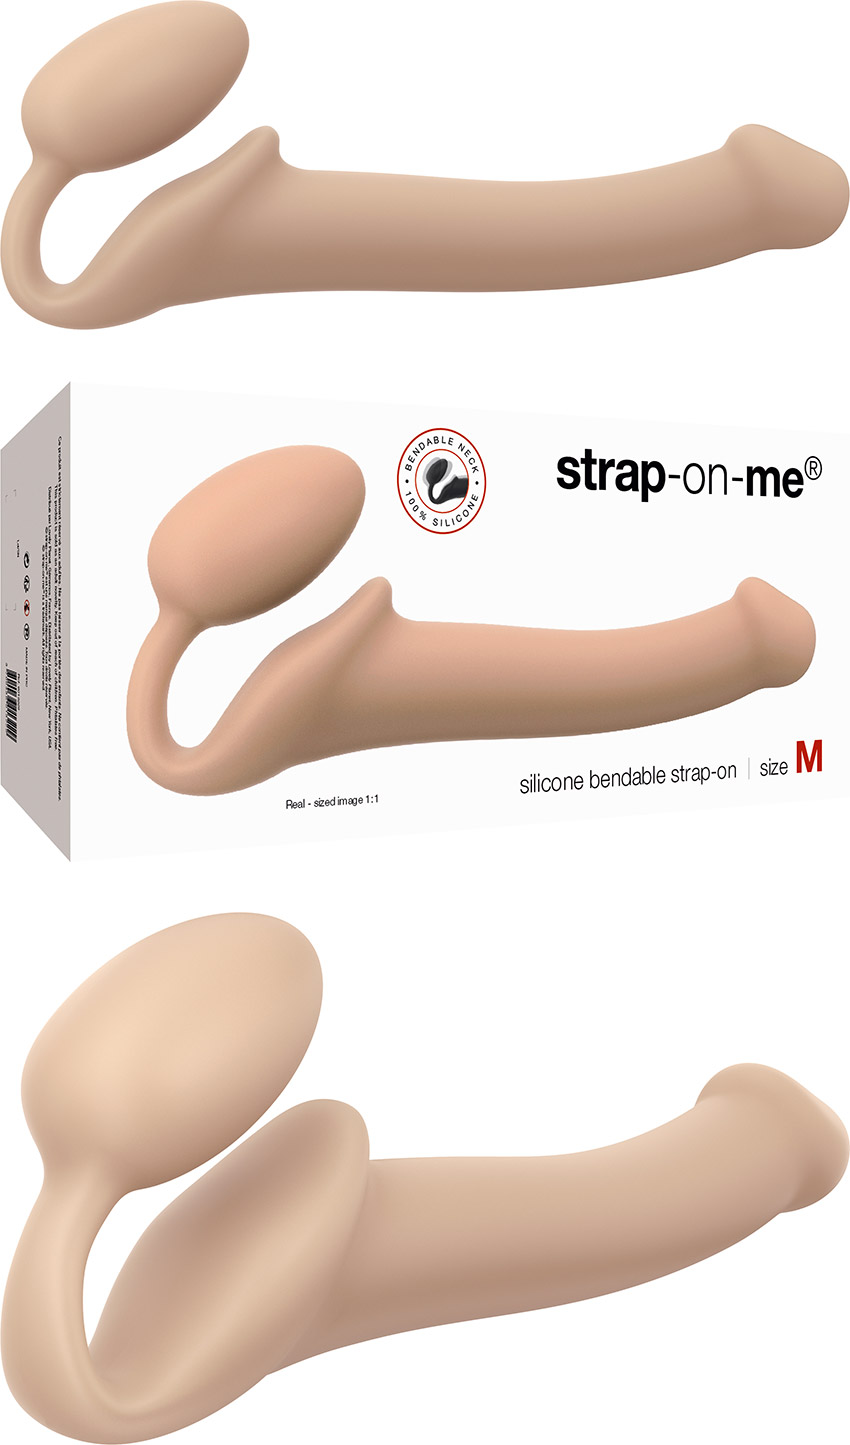 Strap-on-me Bendable doppeltes Sexspielzeug - Beige (M)